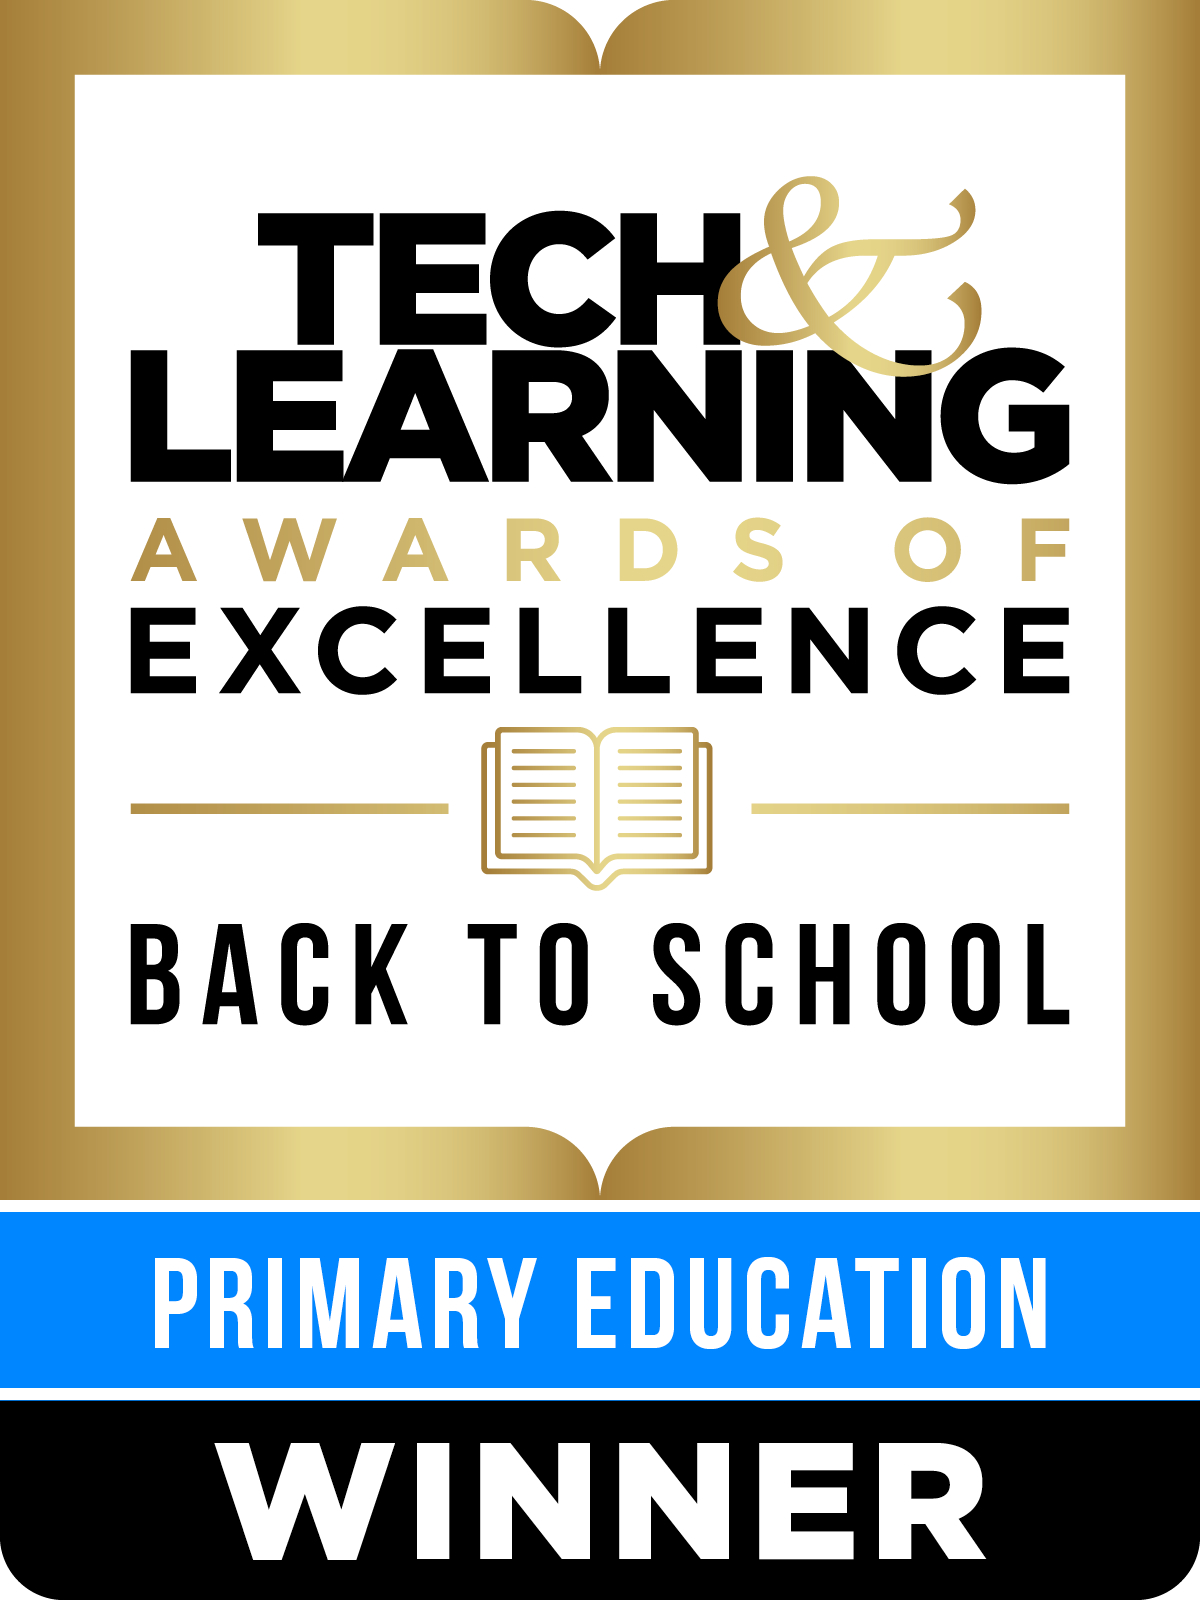 Tech & Learning Awards of Excellence Best Tool for Back to School, Primary Education